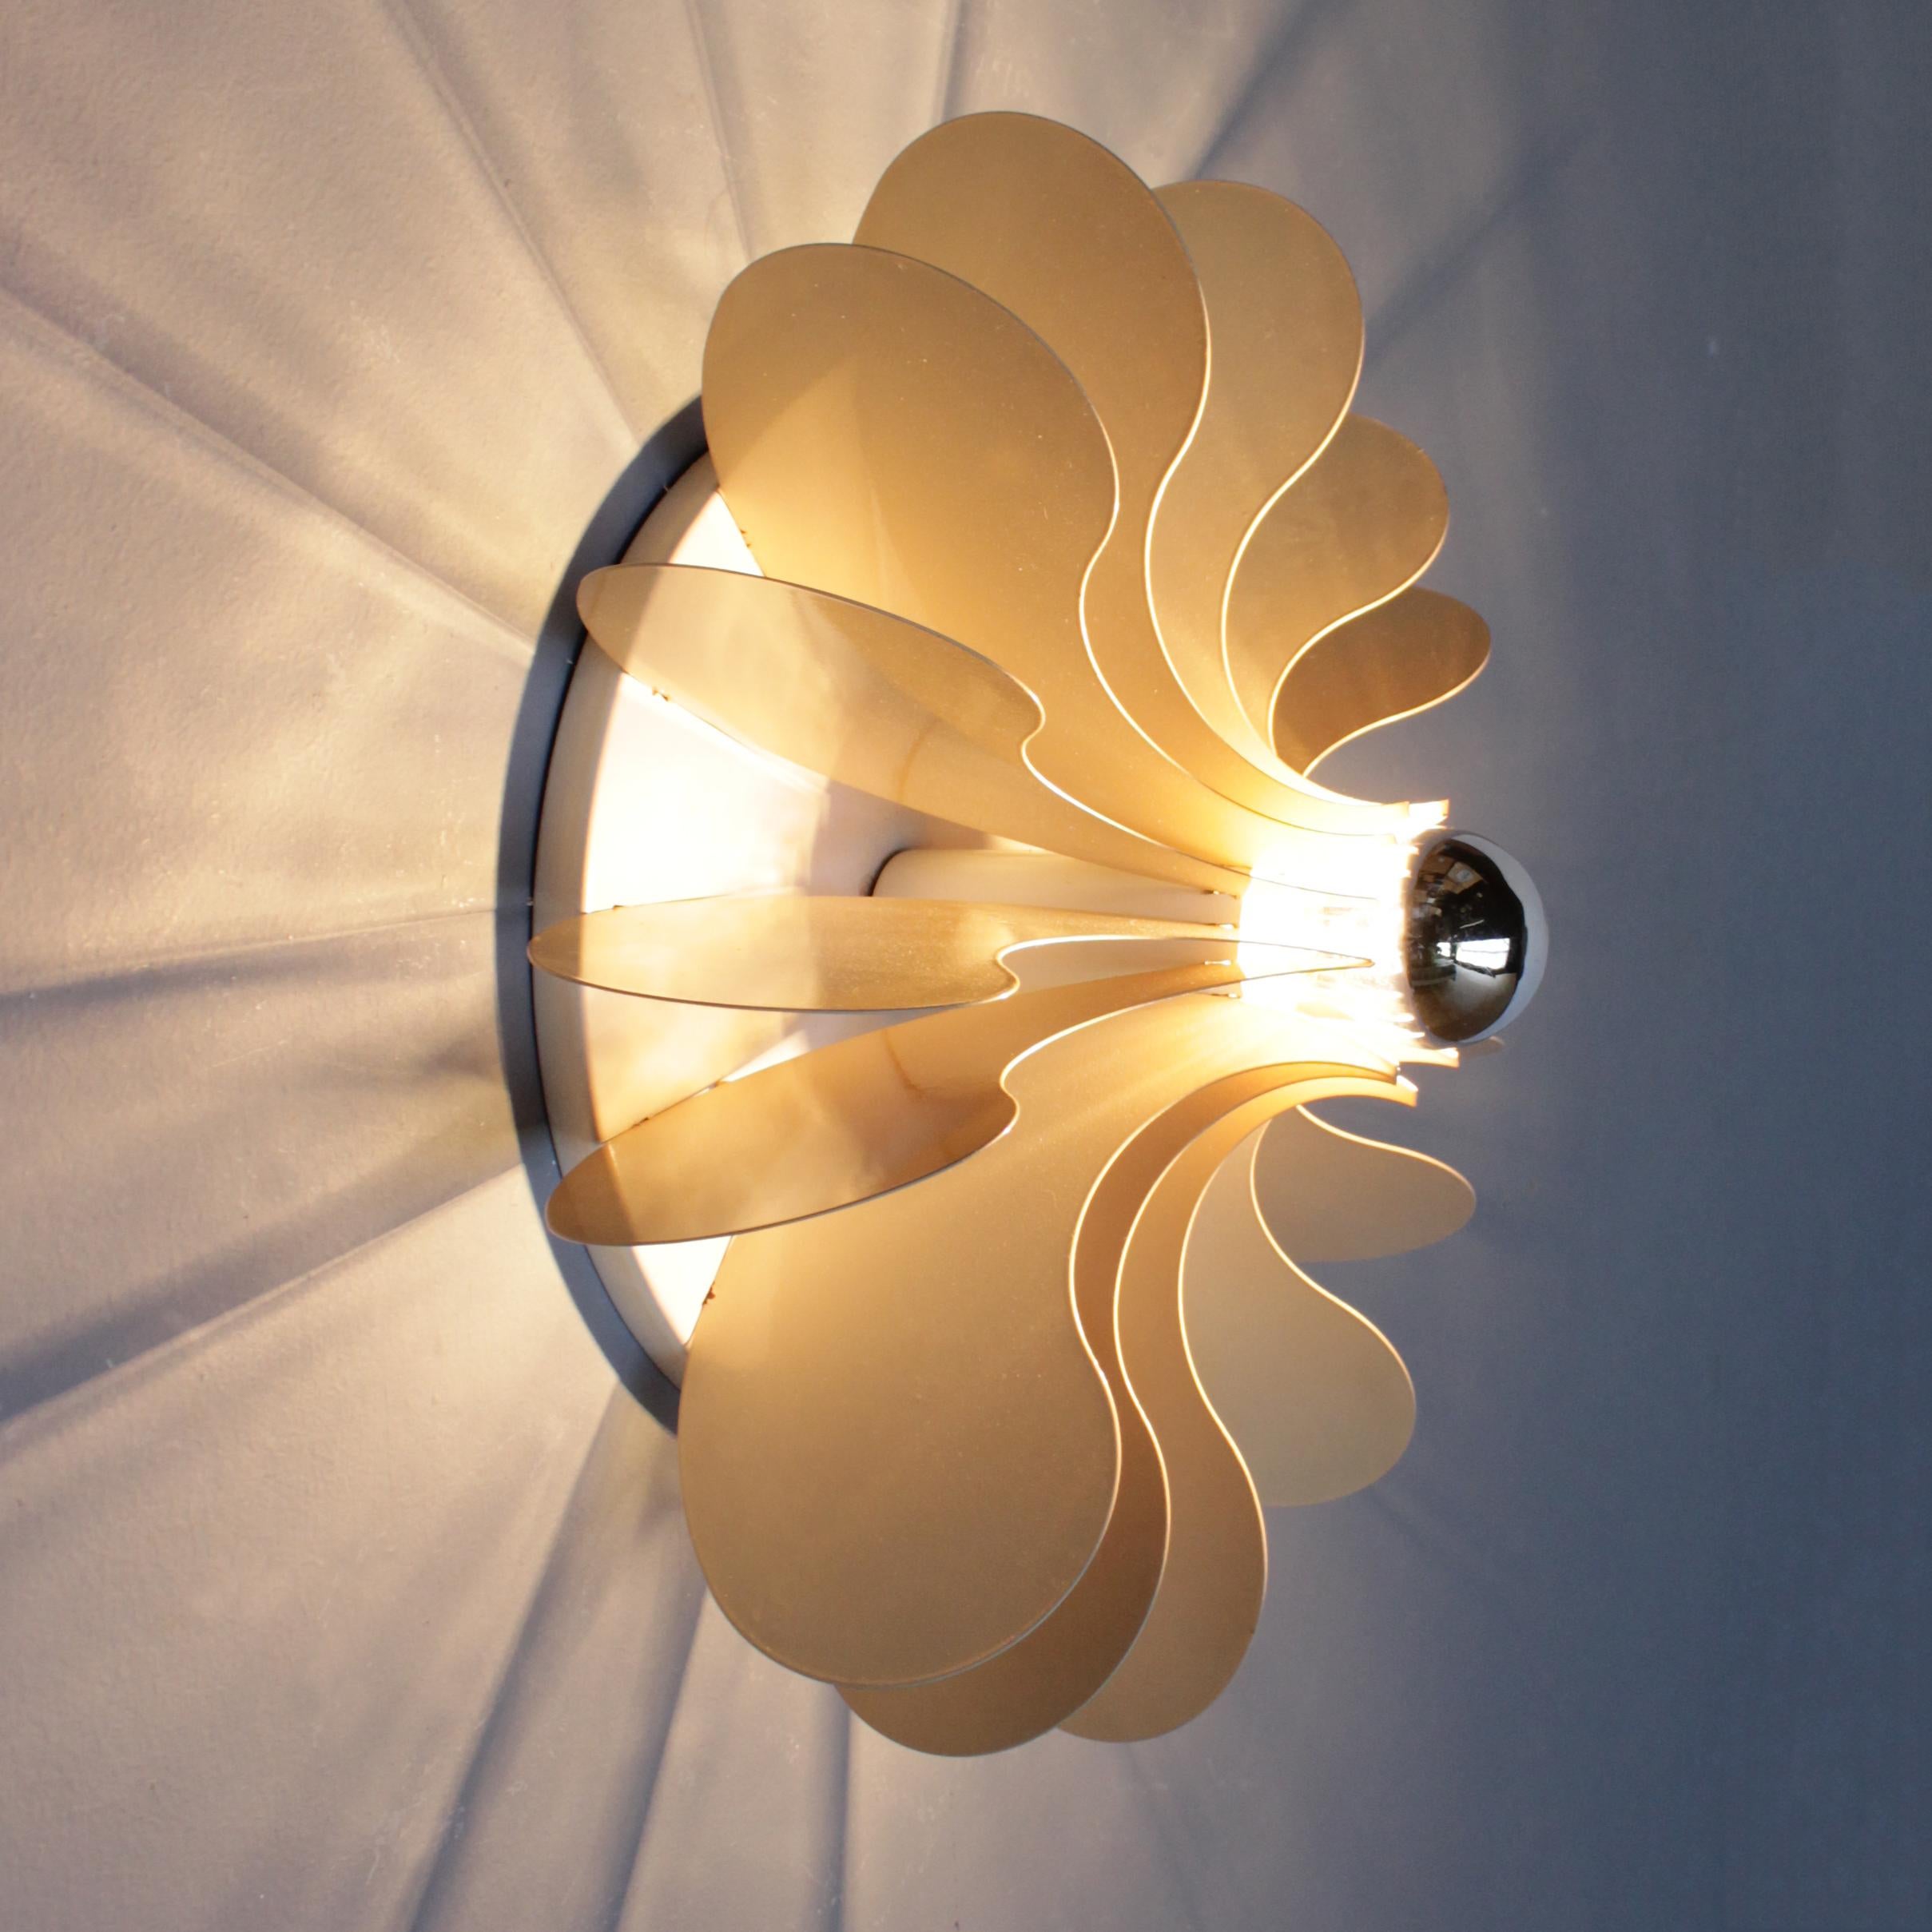 Late 20th Century Bolide Wall Light by Raak Amsterdam